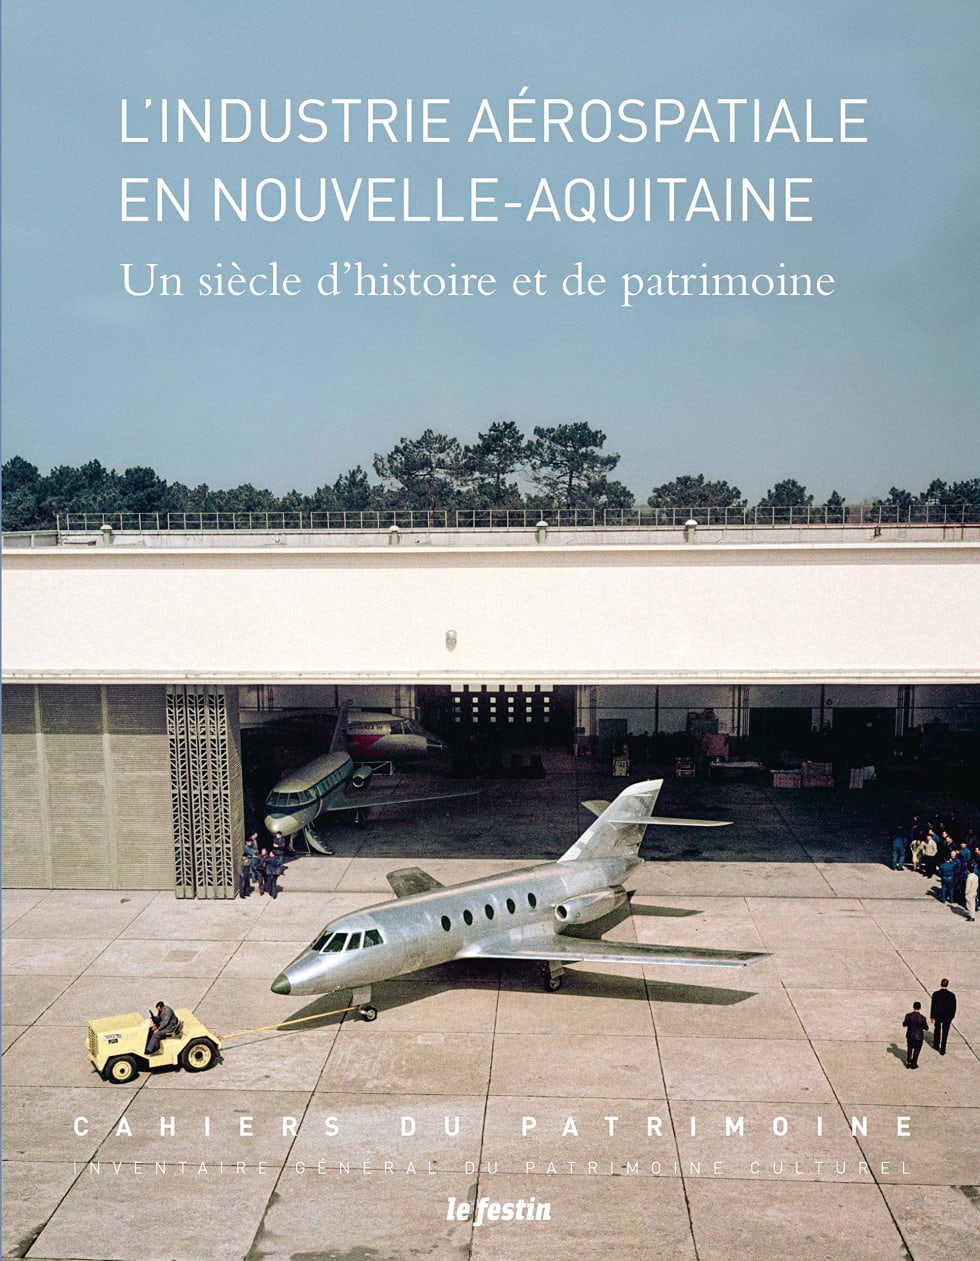 Book: "The Aerospace Industry in the Nouvelle-Aquitaine Region, a Century of History and Heritage"